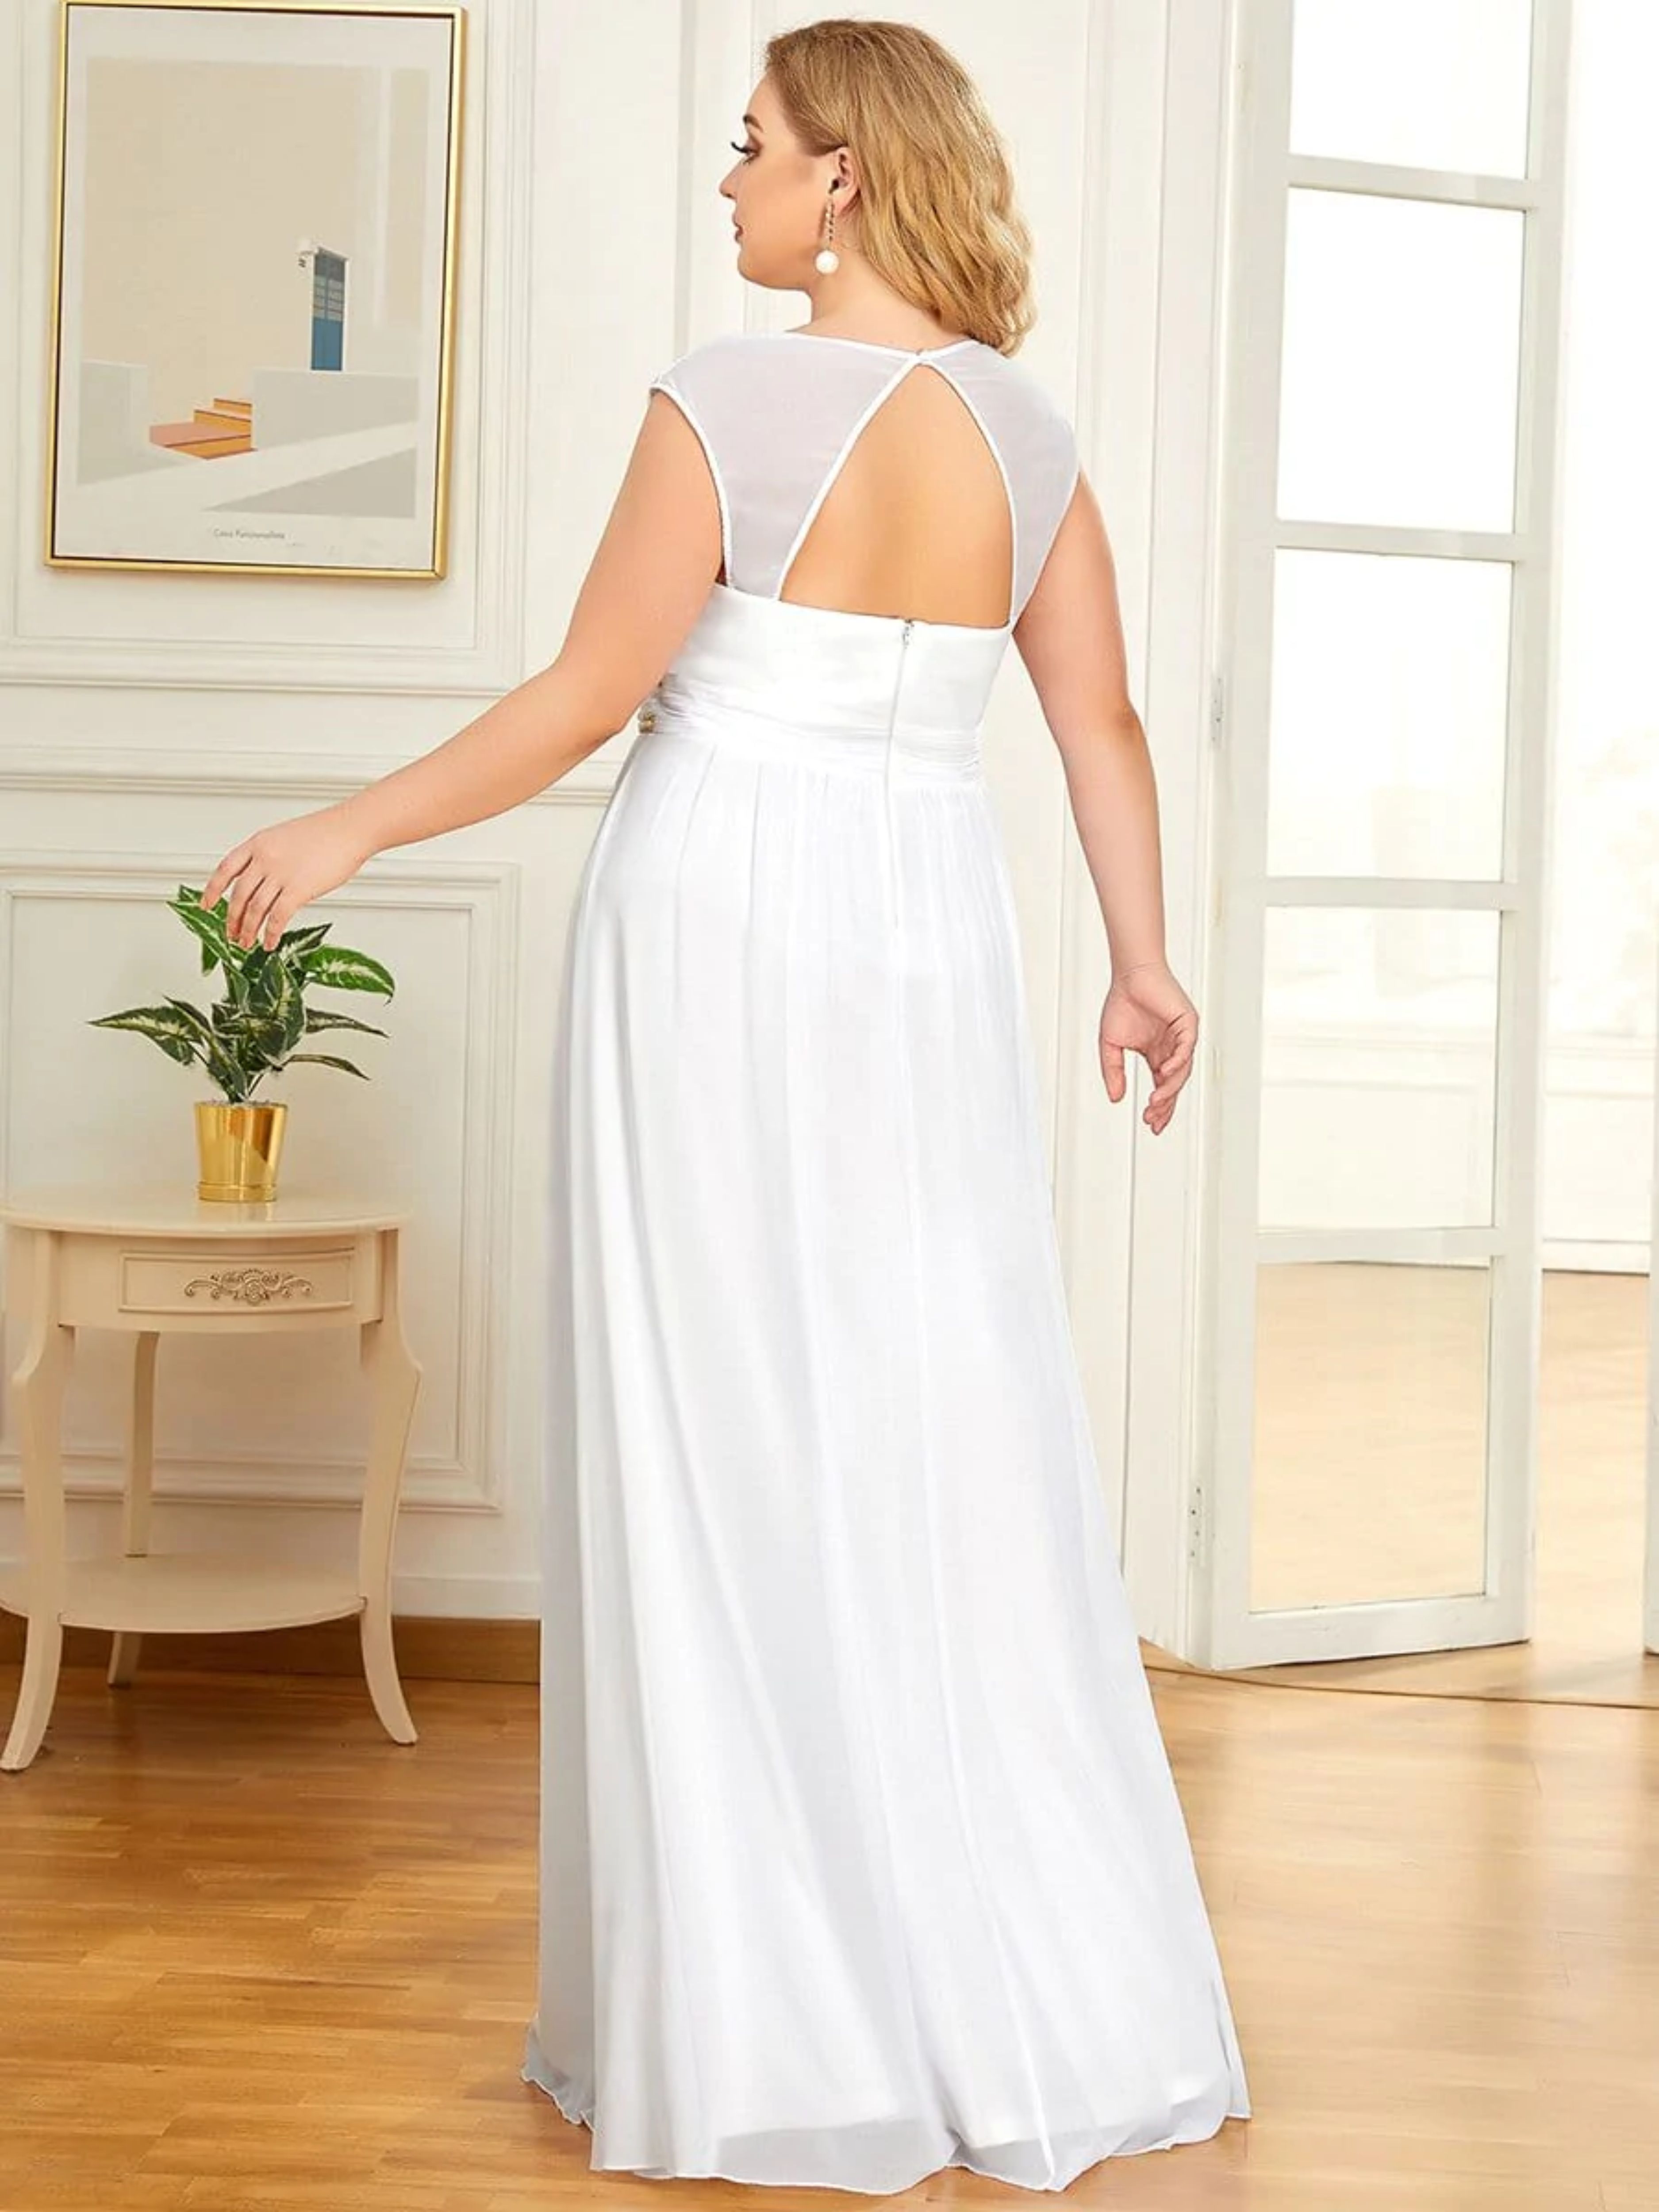 CHIFFON WEDDING DRESS WITH DECORATIVE BEADED DETAIL ON THE WAIST. THE PLUNGING V-NECK AND CAPPED SLEEVELESS TOP FEATURE FLATTERING RUCHING THROUGHOUT, ALONG WITH A FLOWING A-LINE SILHOUETTE.